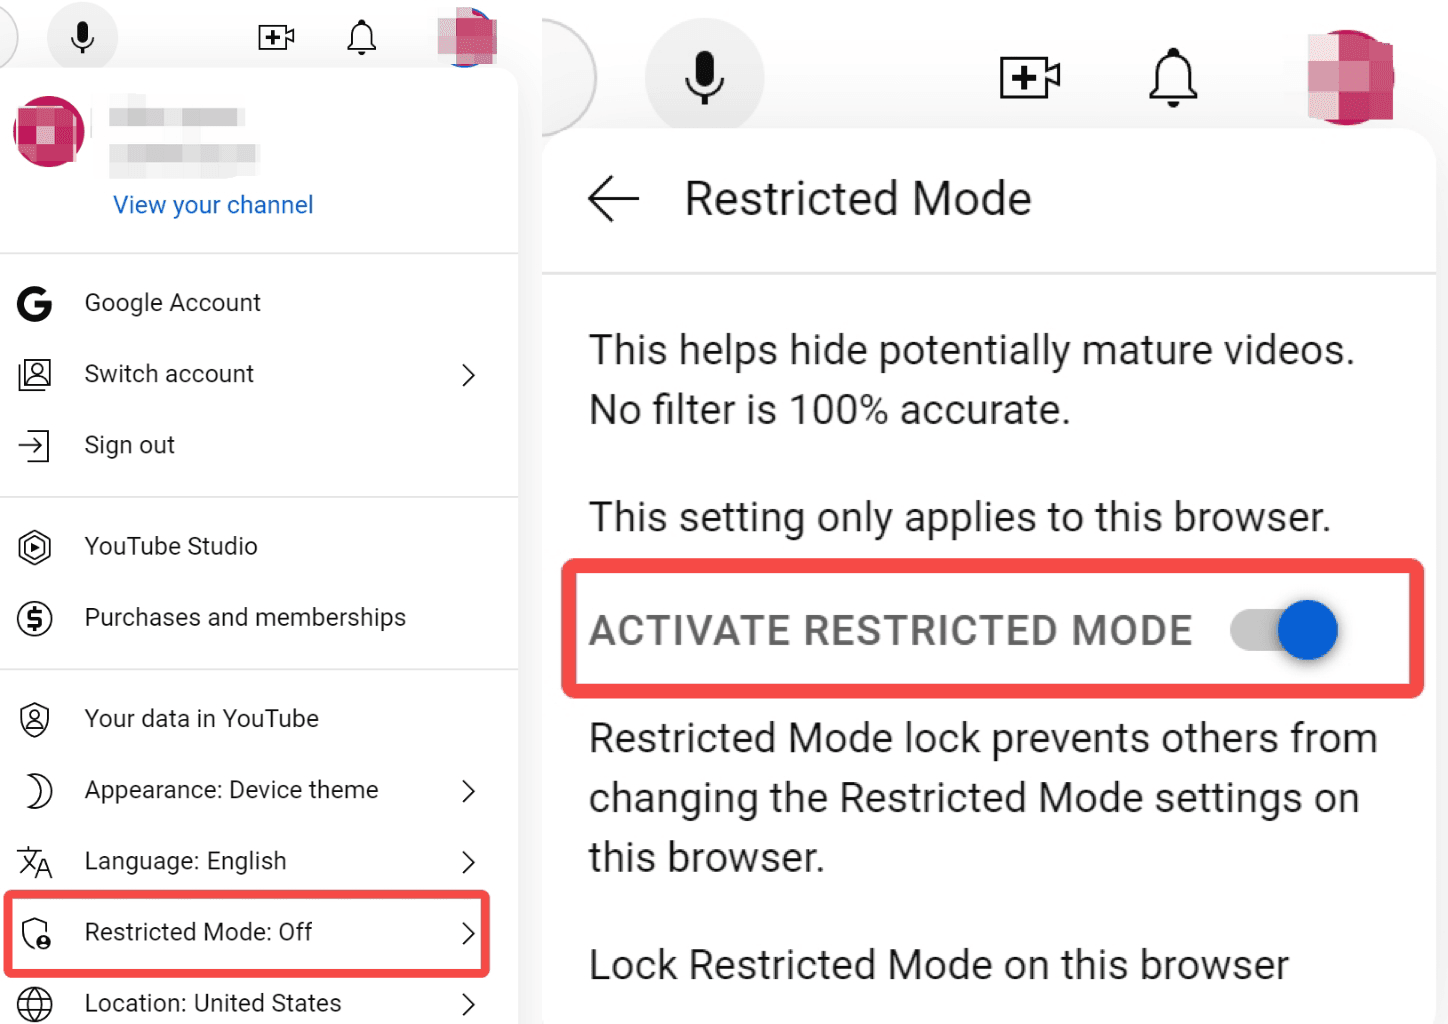 Steps of how to turn on Restricted Mode in a web browser.